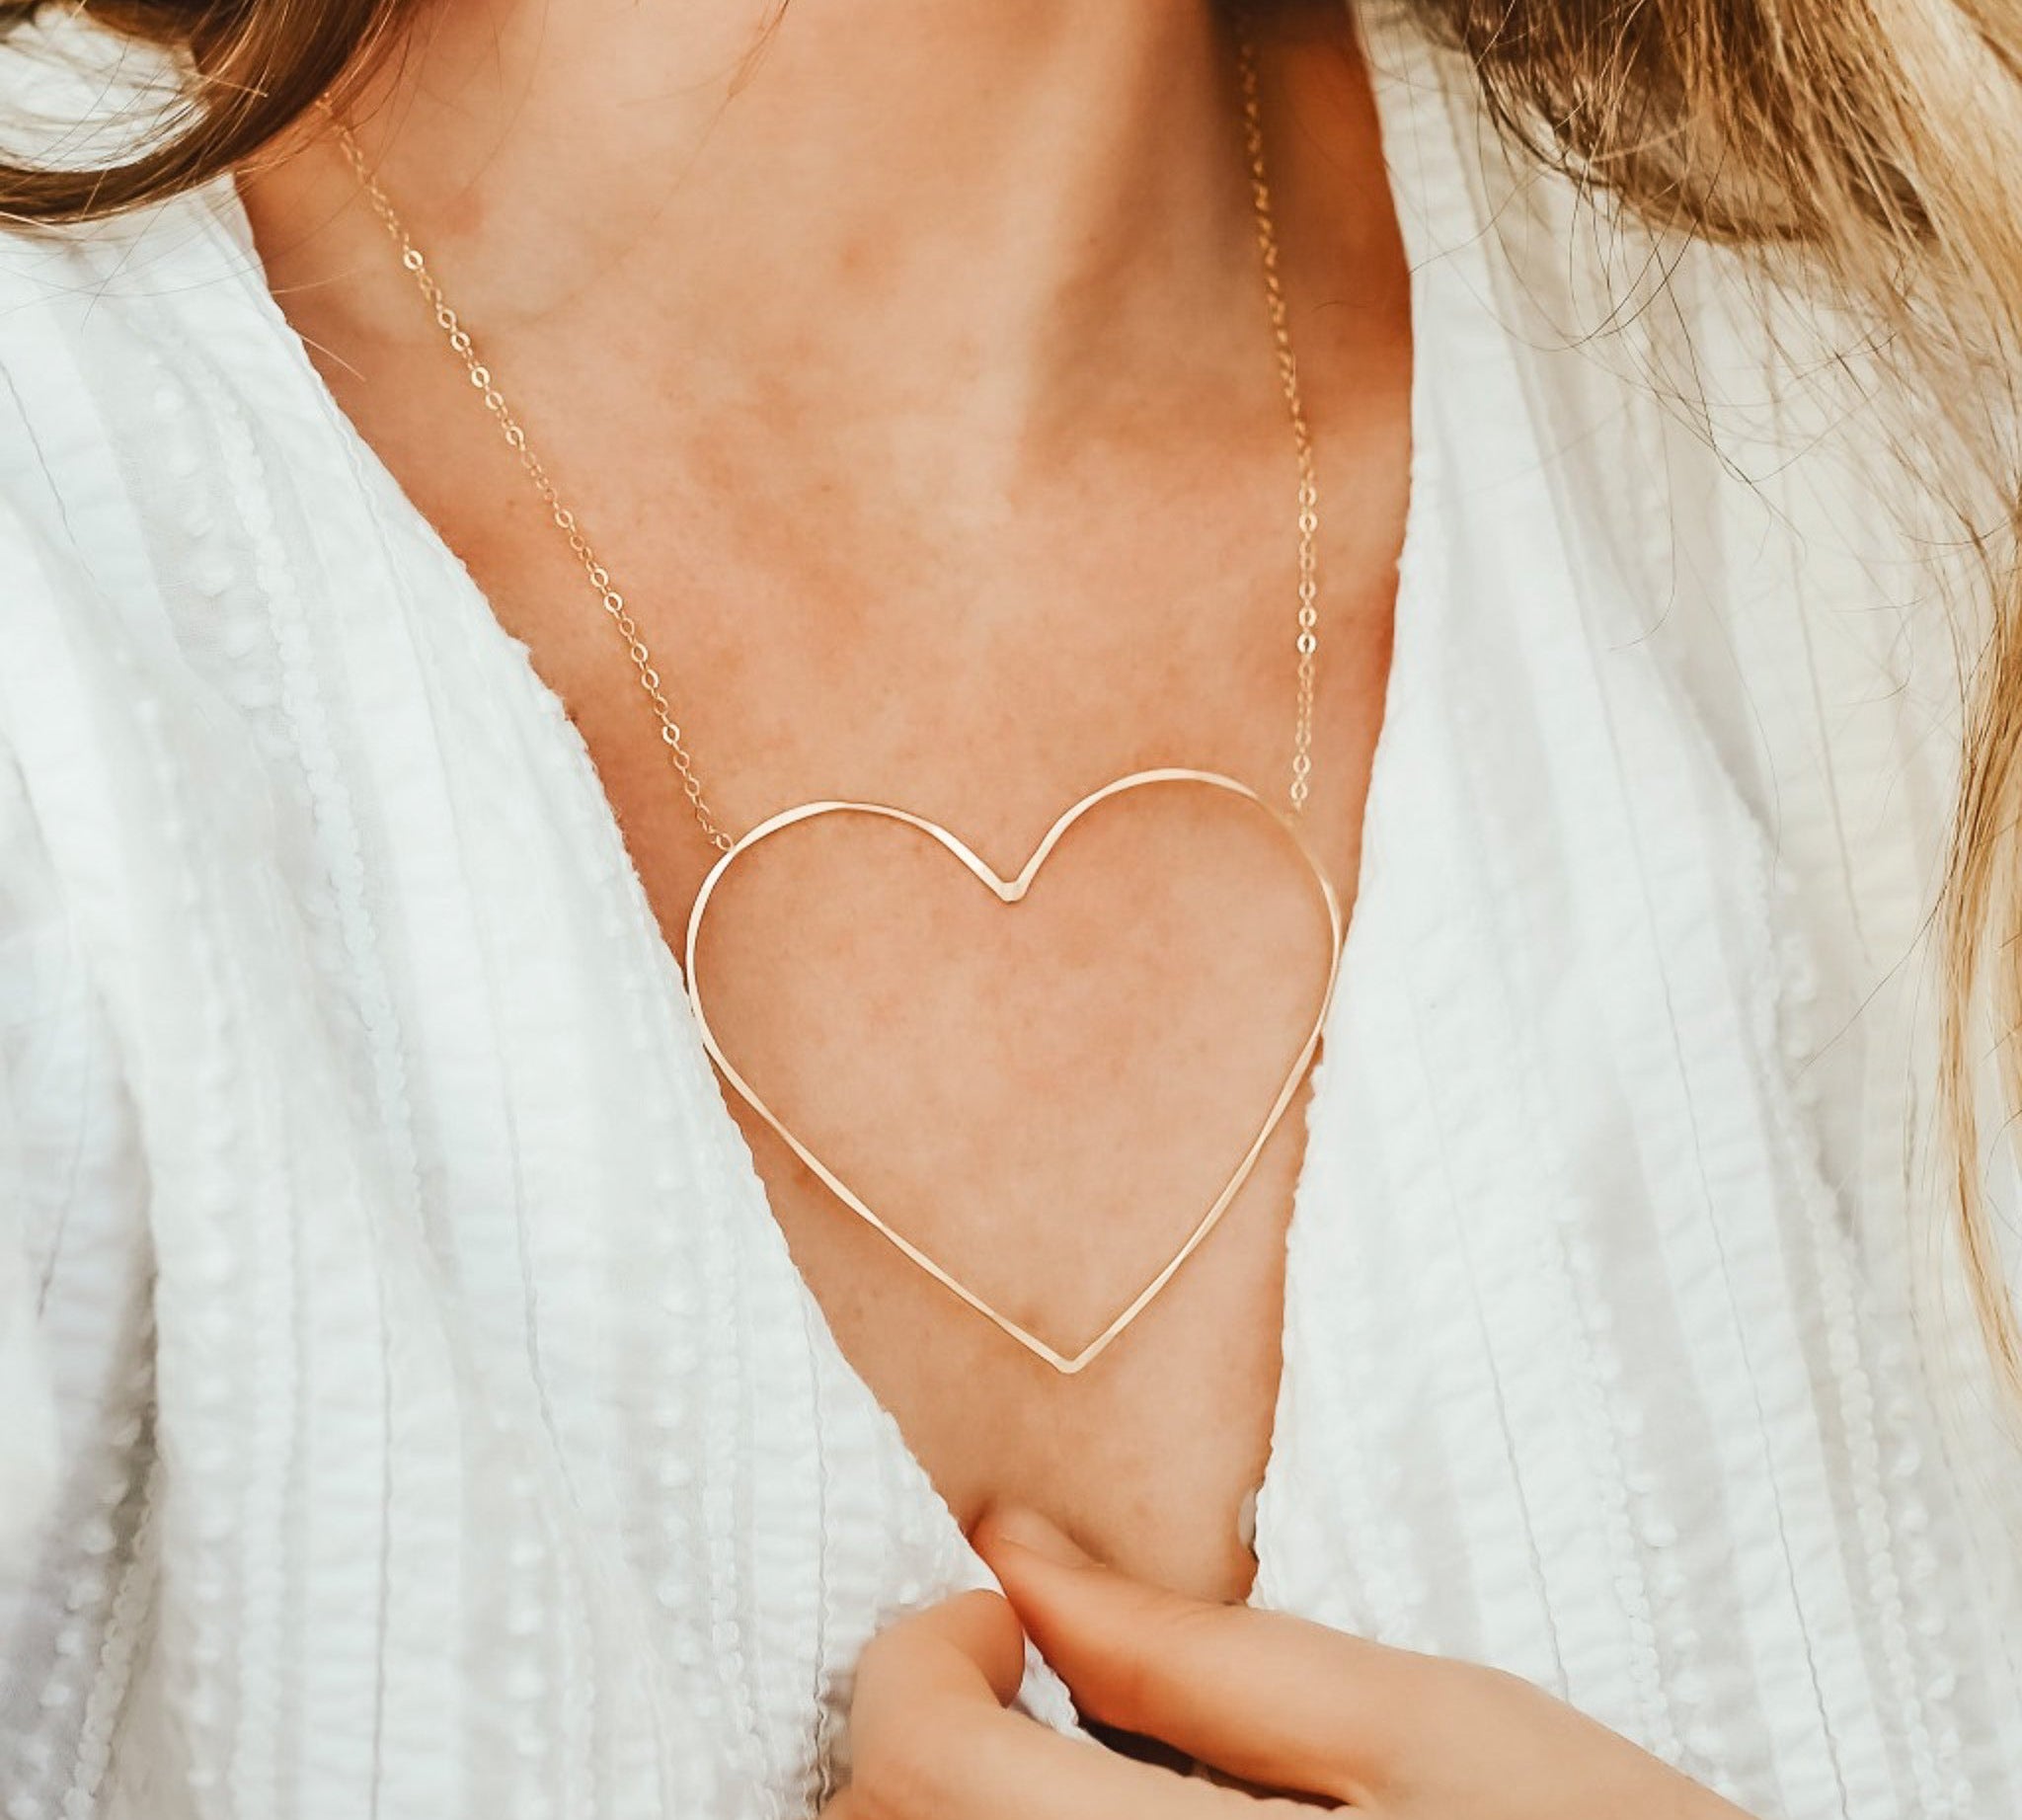 Heart of Gold Necklace, shown on model